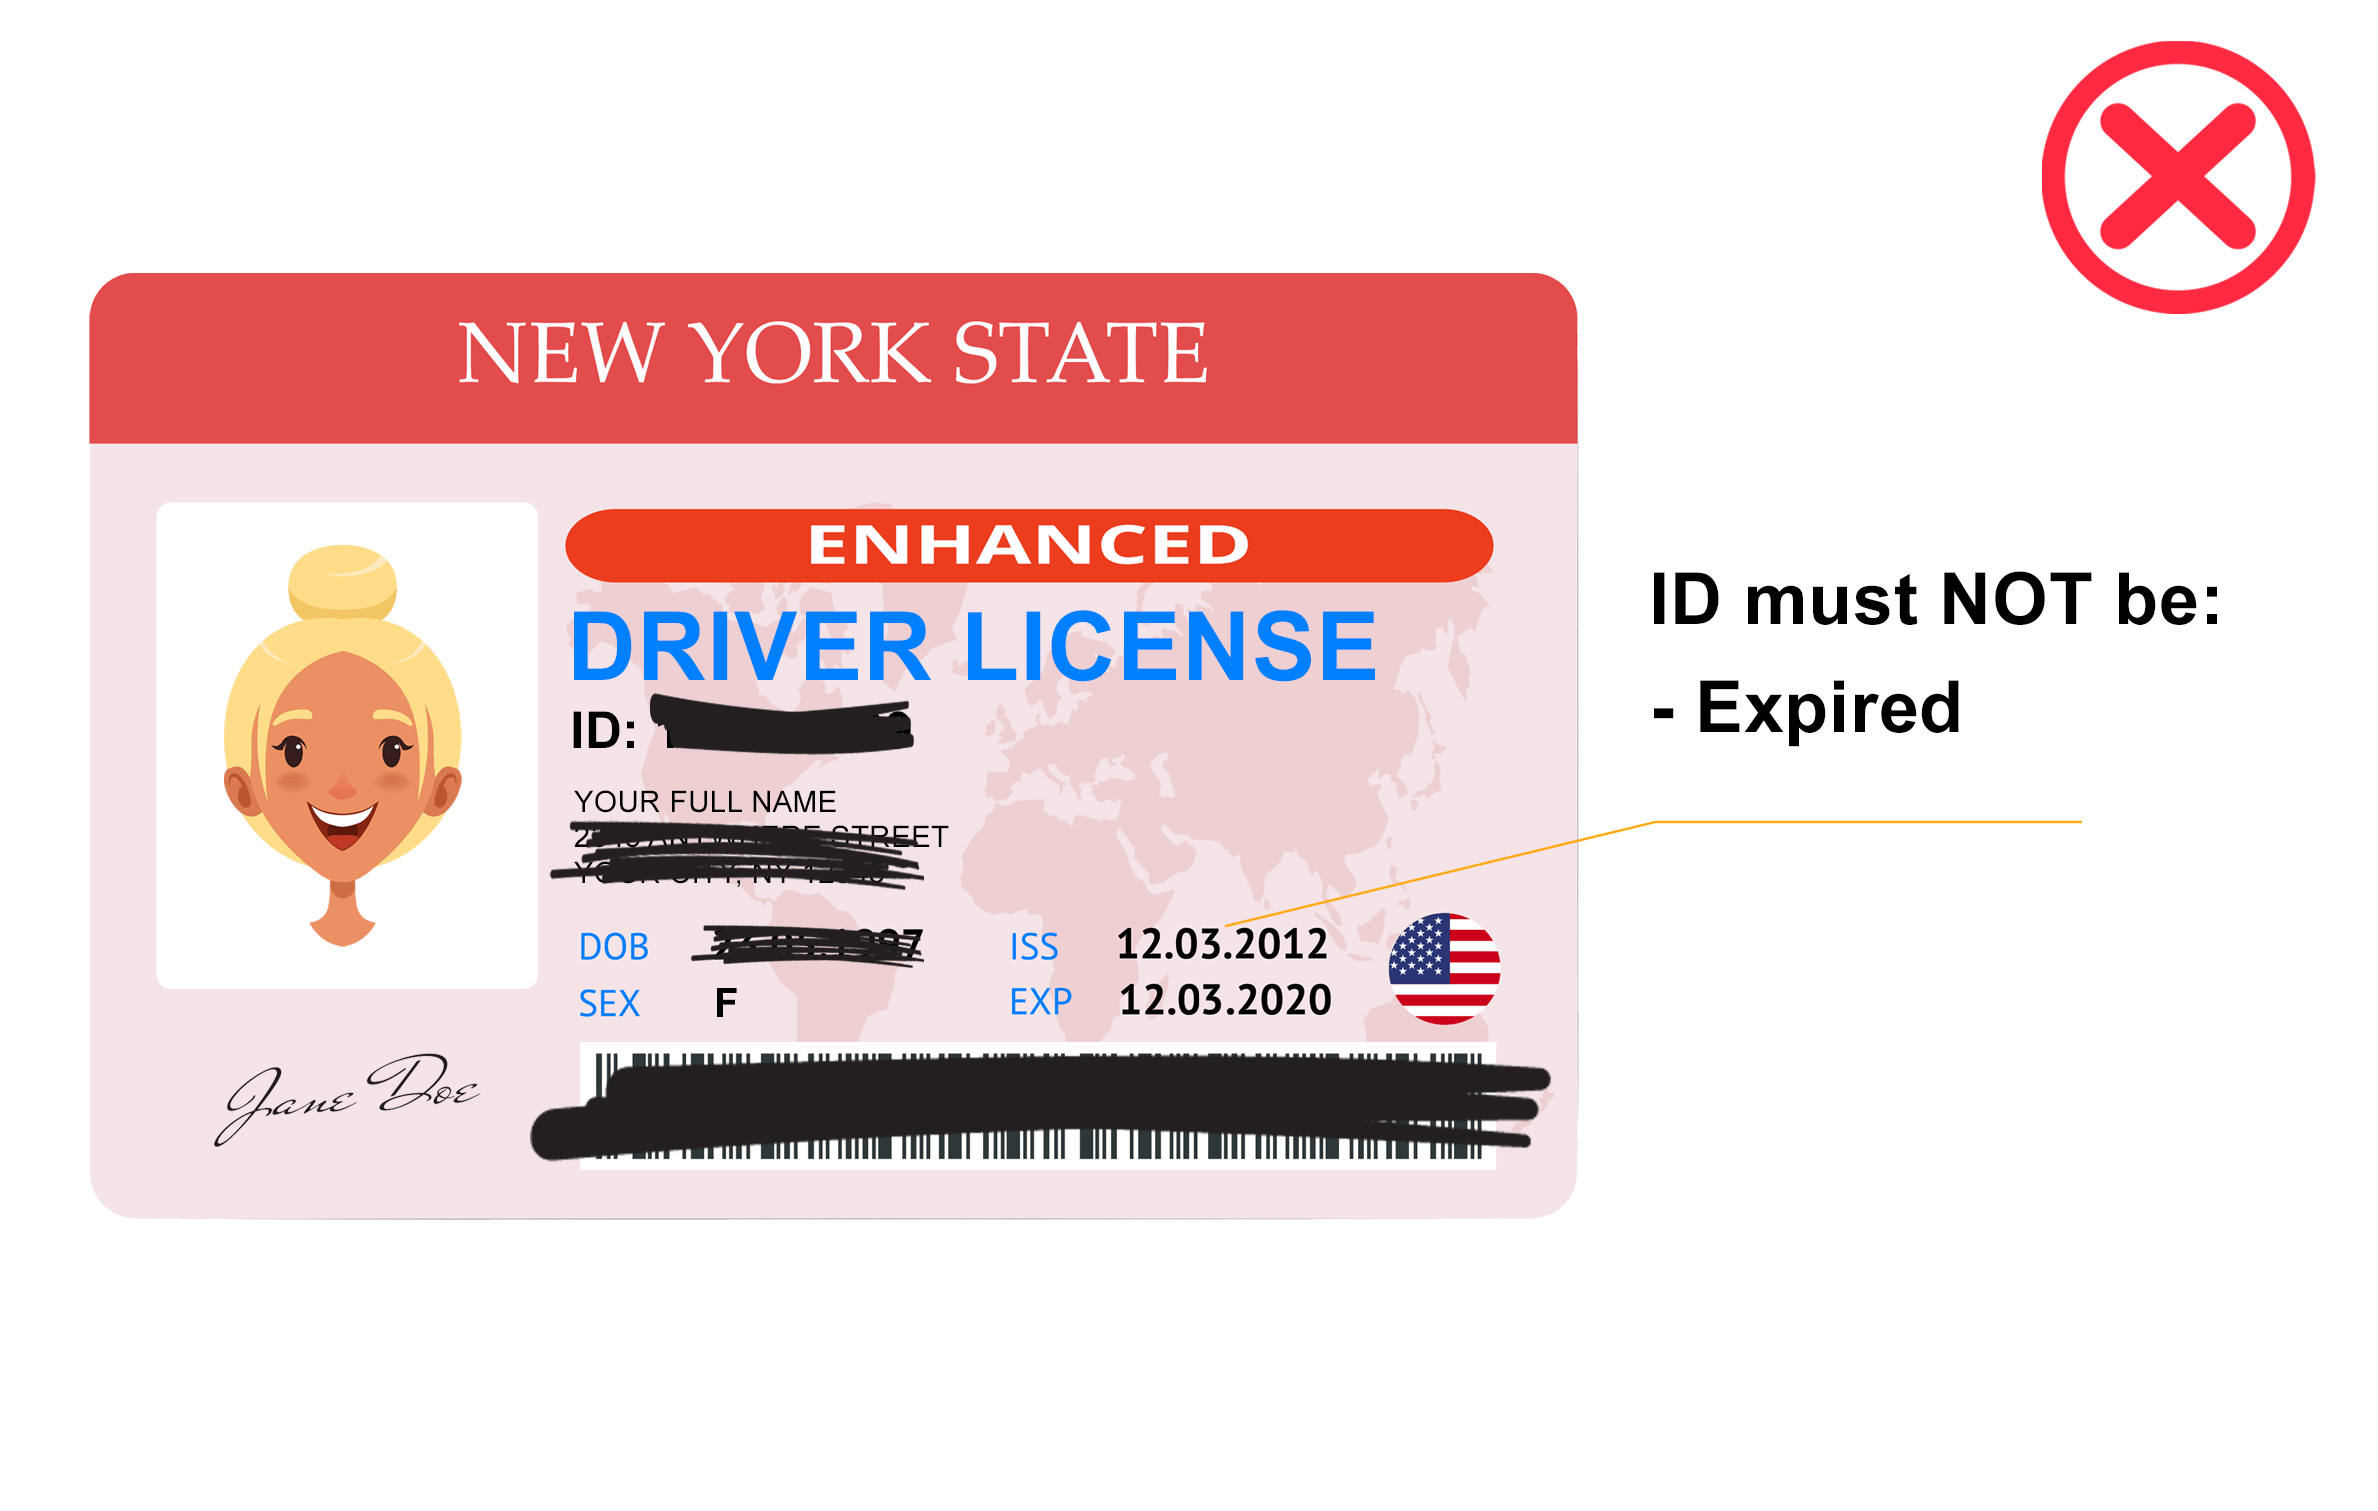 Expired_id.png